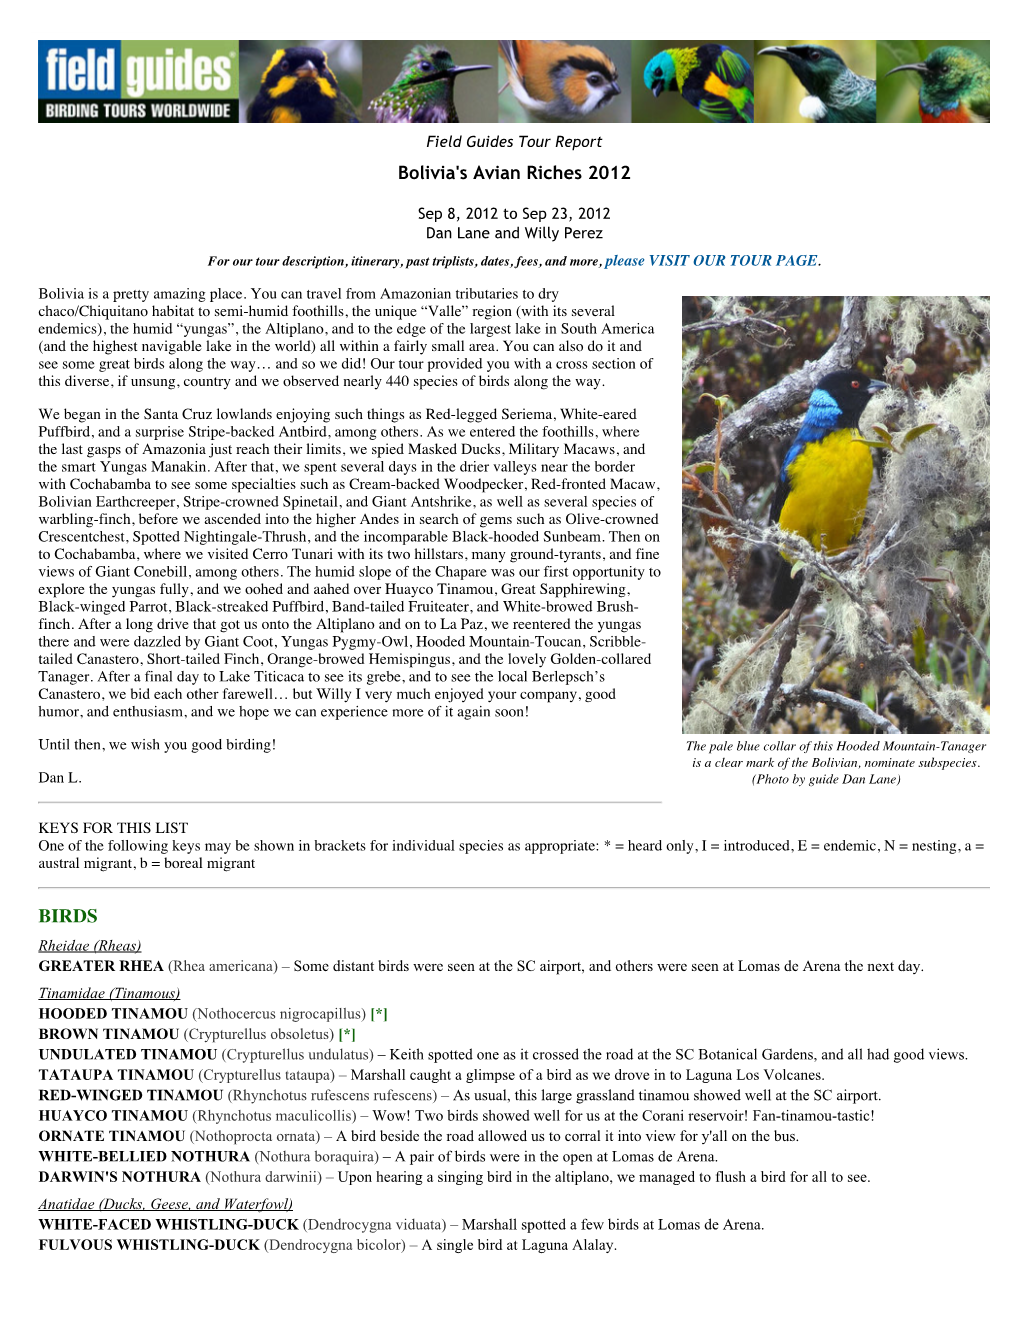 FIELD GUIDES BIRDING TOURS: Bolivia's Avian Riches 2012